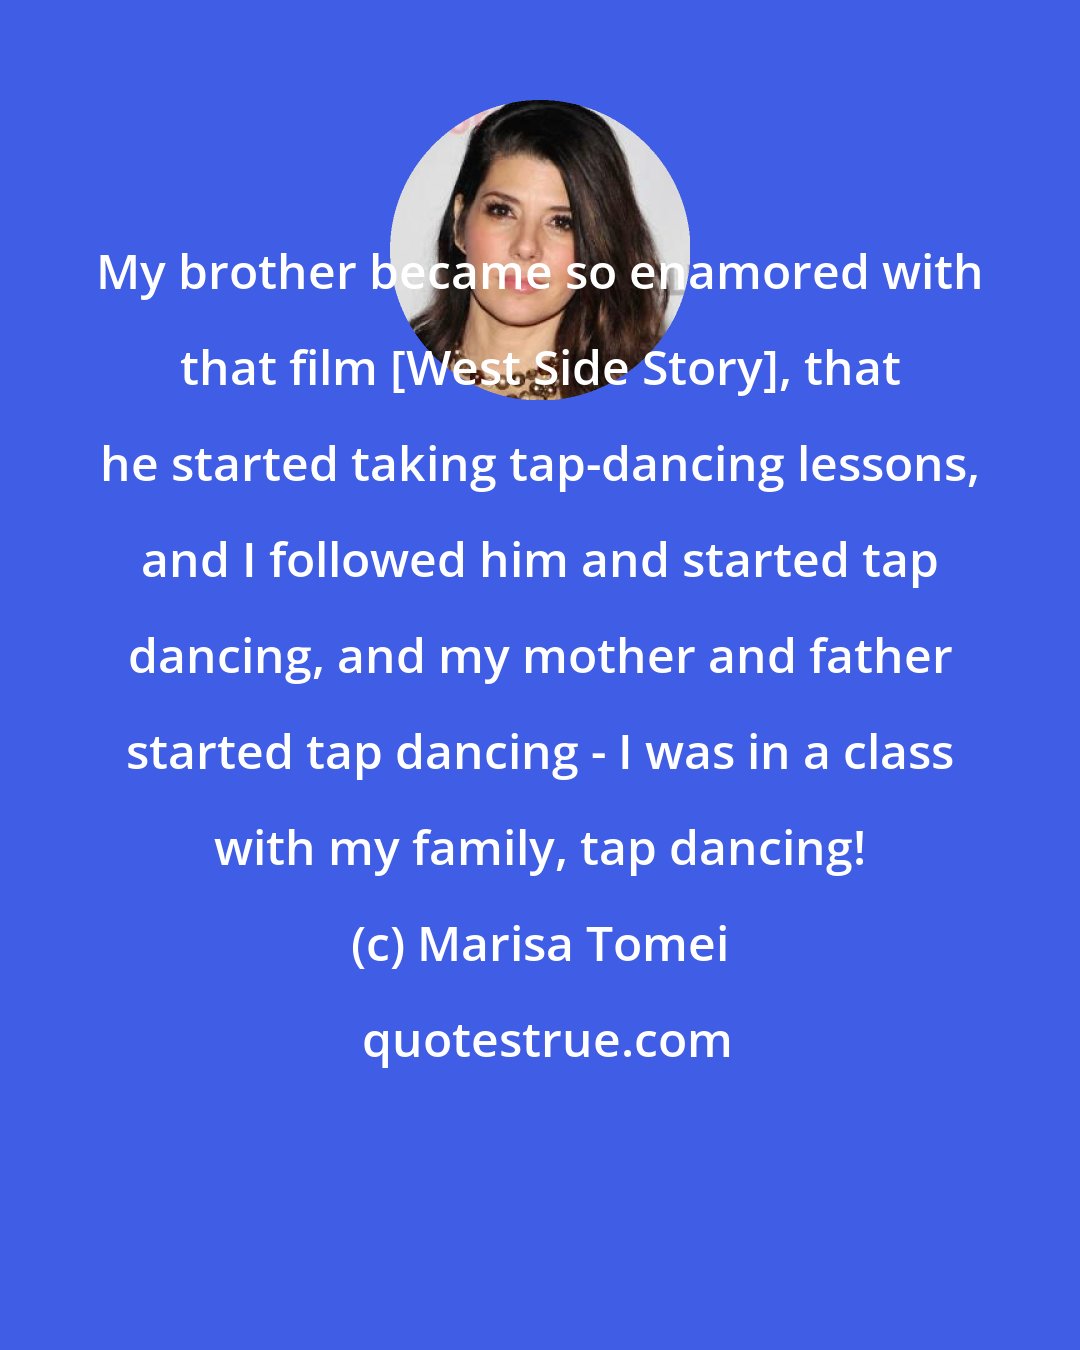 Marisa Tomei: My brother became so enamored with that film [West Side Story], that he started taking tap-dancing lessons, and I followed him and started tap dancing, and my mother and father started tap dancing - I was in a class with my family, tap dancing!